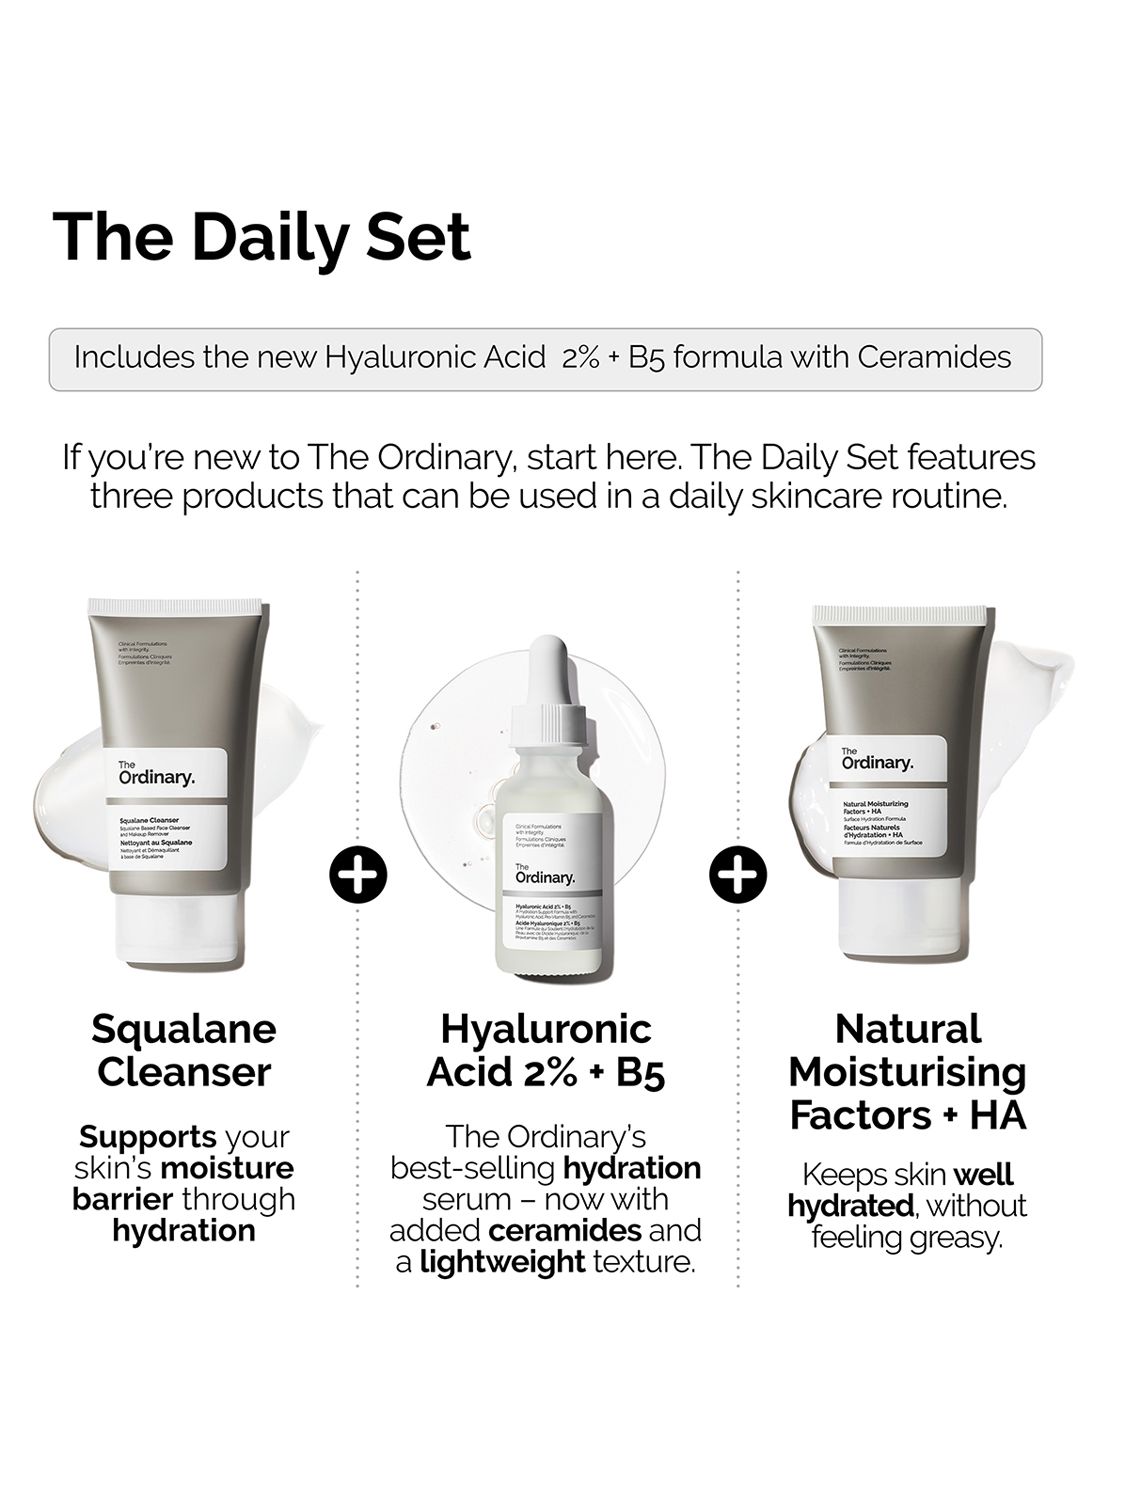 The Ordinary The Daily Set Skincare Gift Set 2